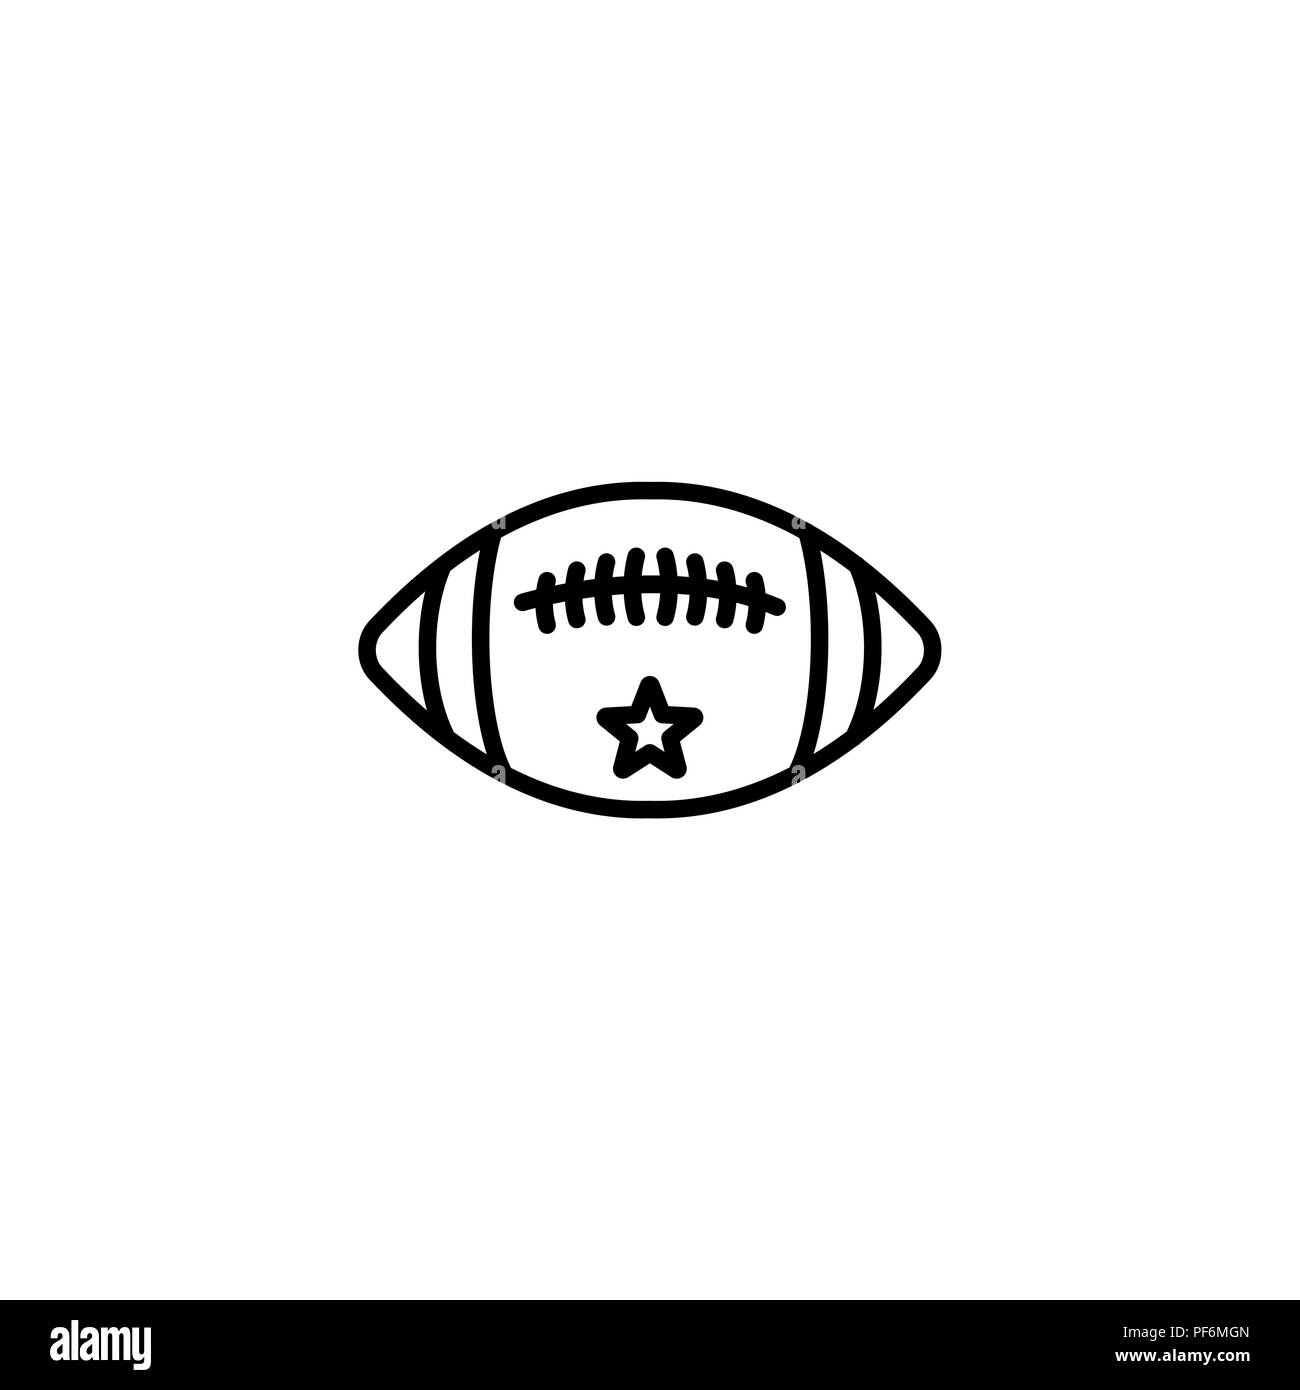 Web line icon. American football black on white background Stock Vector